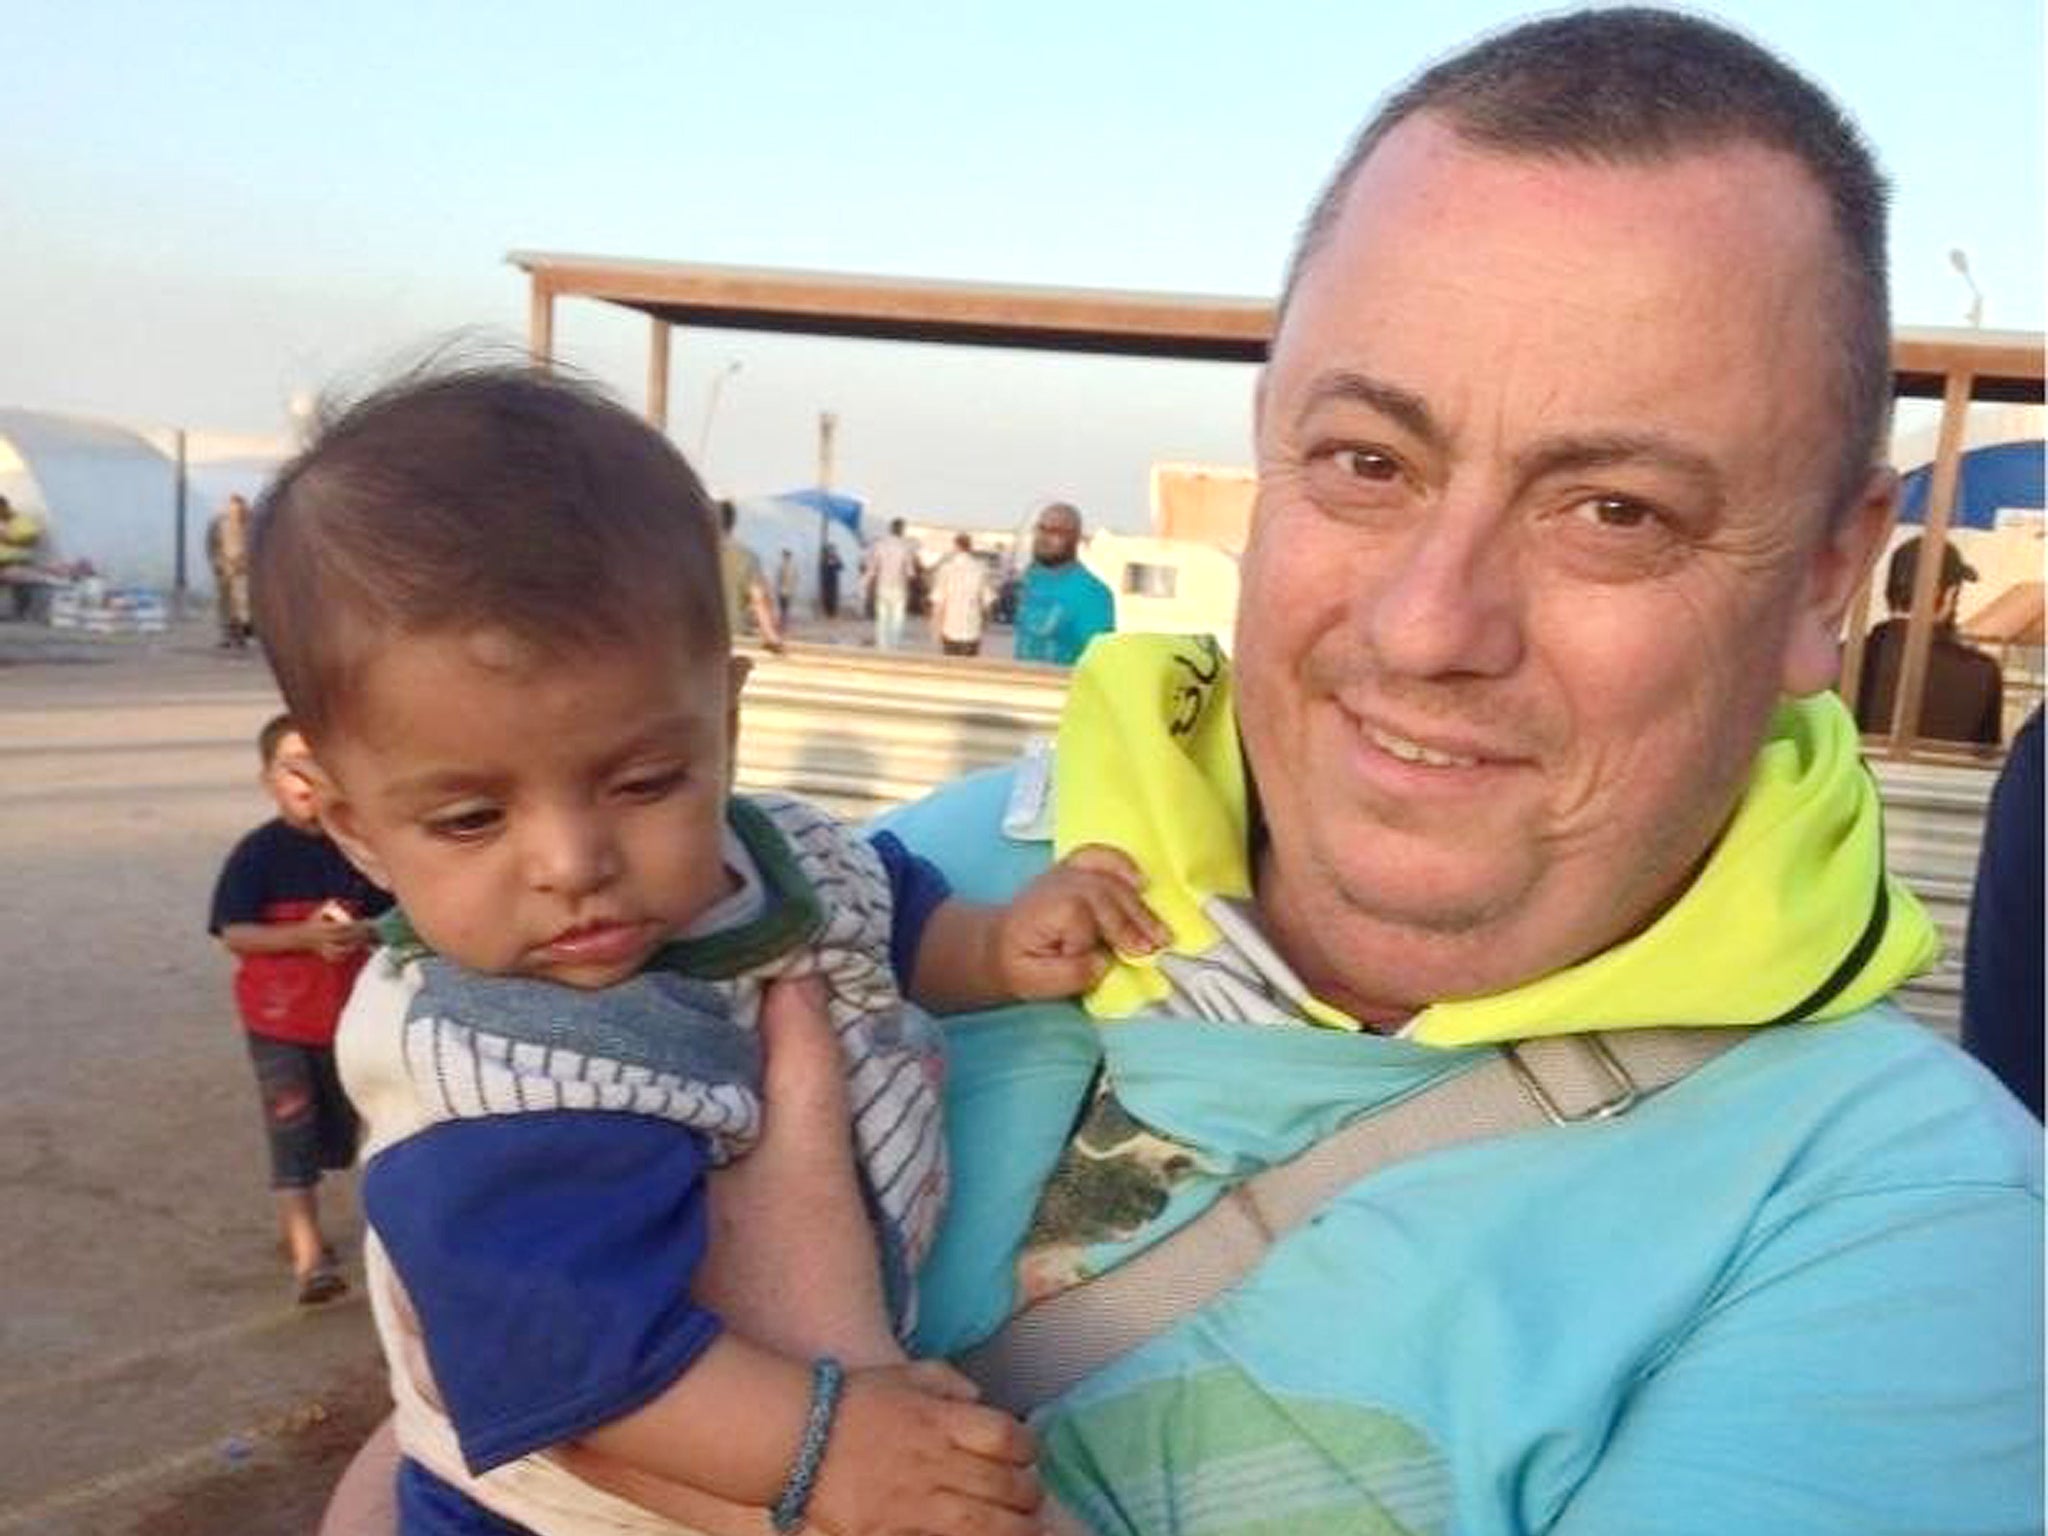 Alan Henning was murdered by Isis in a propaganda video released in October last year